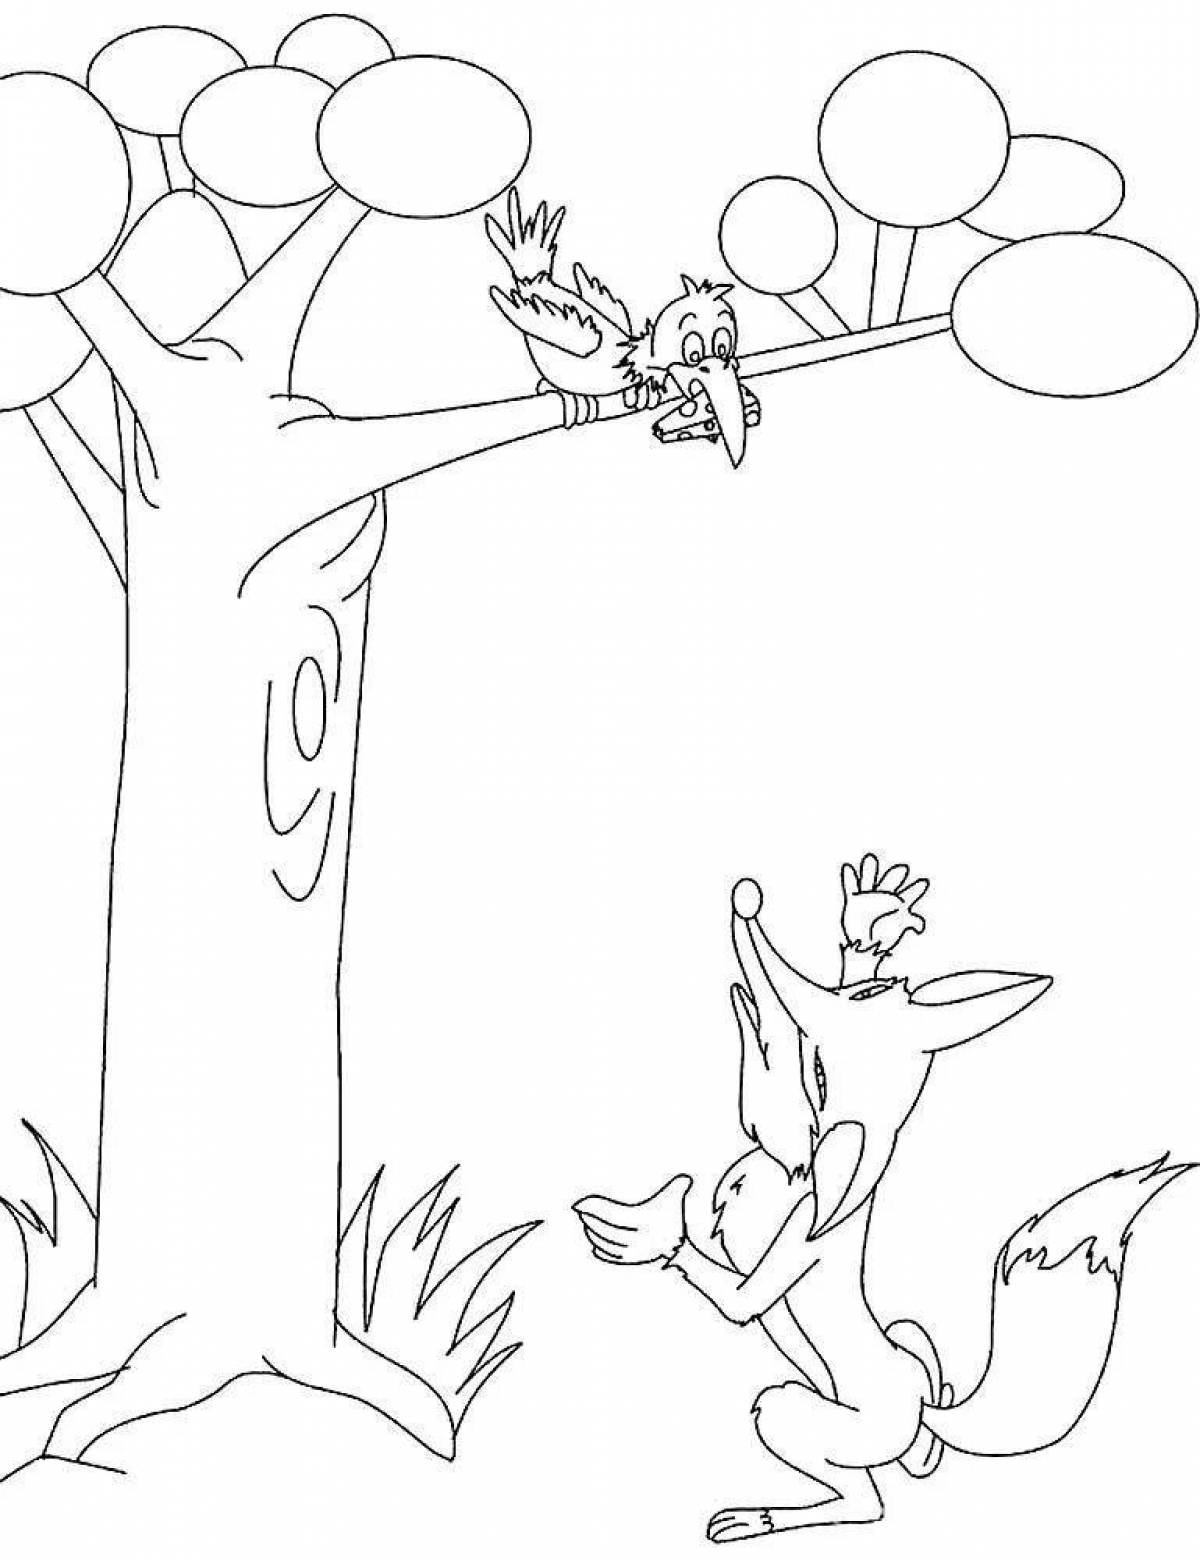 Dreamy crow and fox coloring page